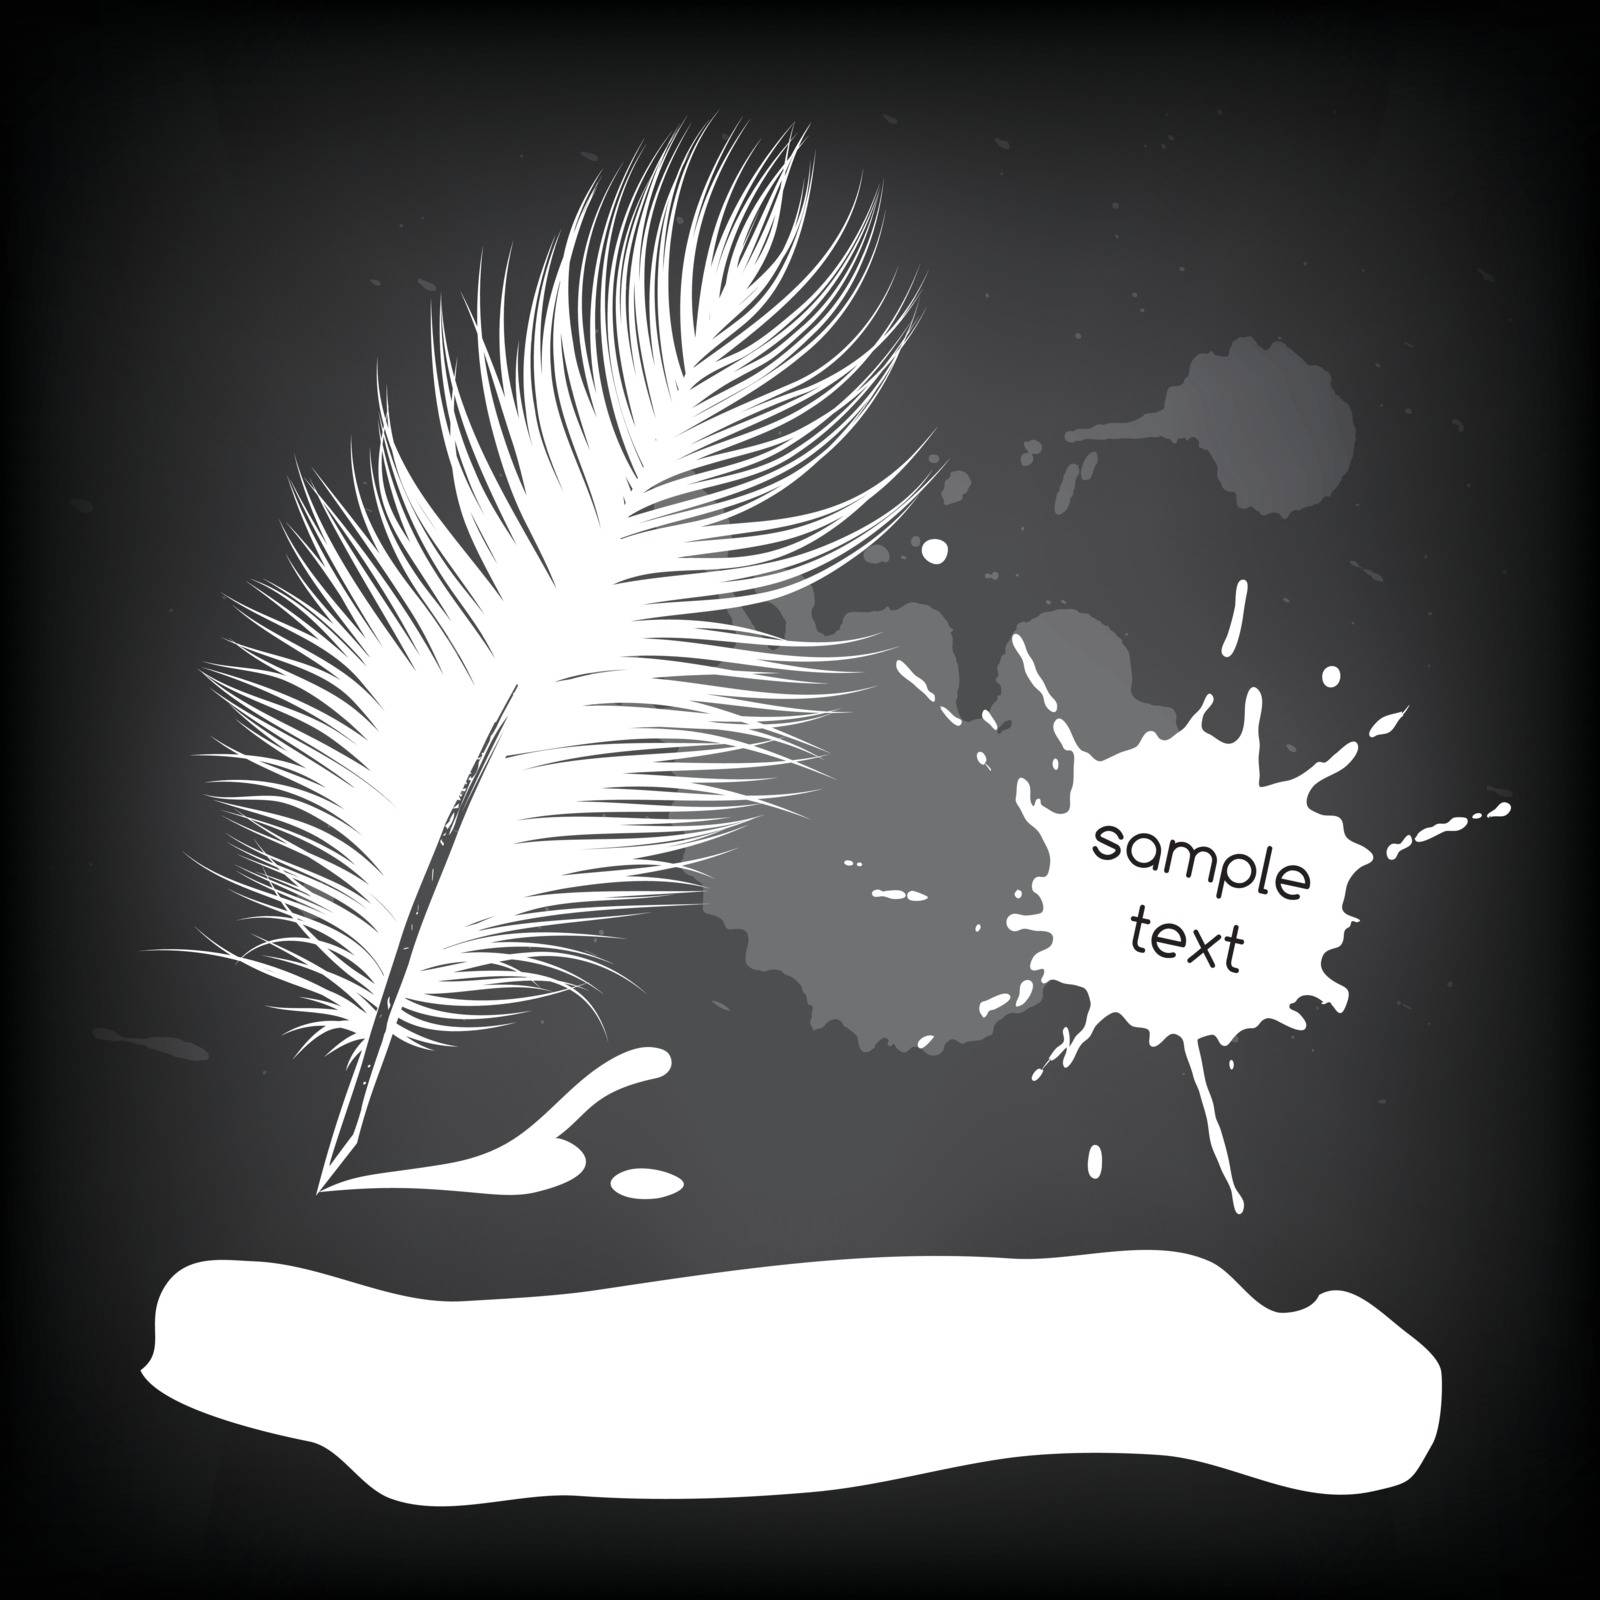 Feather pen vector drawing, quill, calligraphy tool with ink splatter.